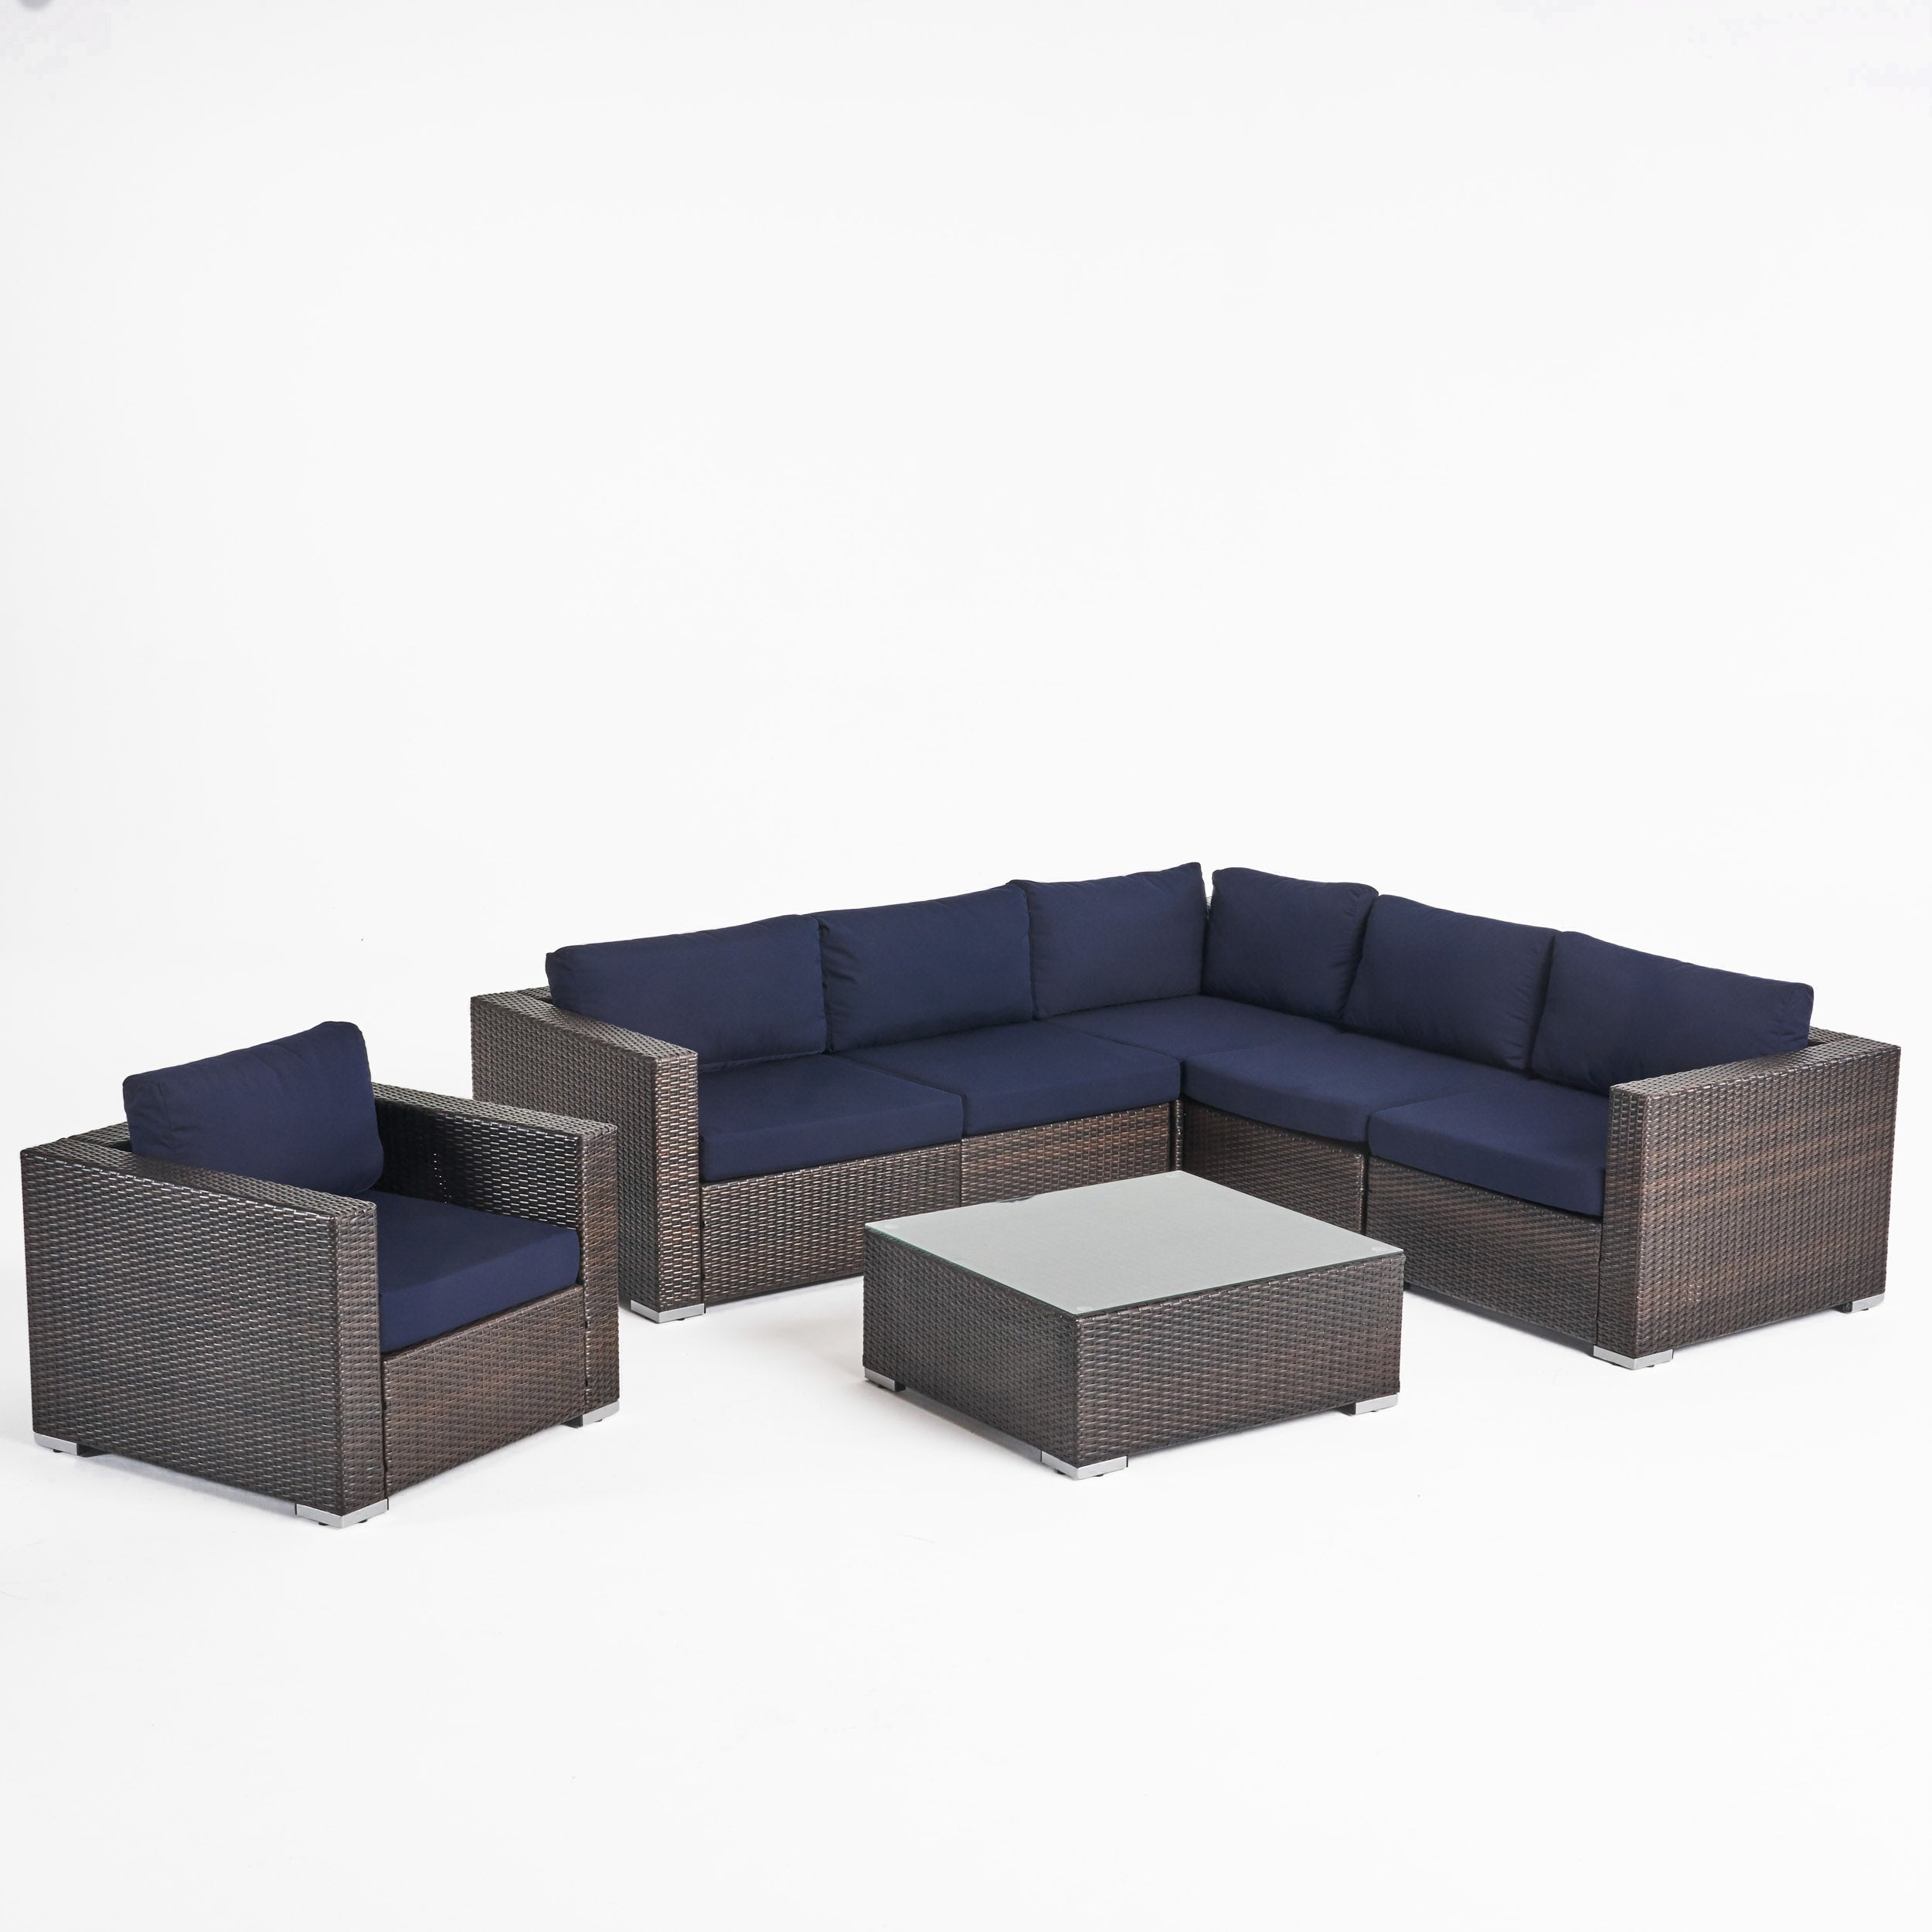 Kyra Outdoor 6 Seater Wicker Sectional Sofa Set with Sunbrella Cushions Gray Canvas Teal